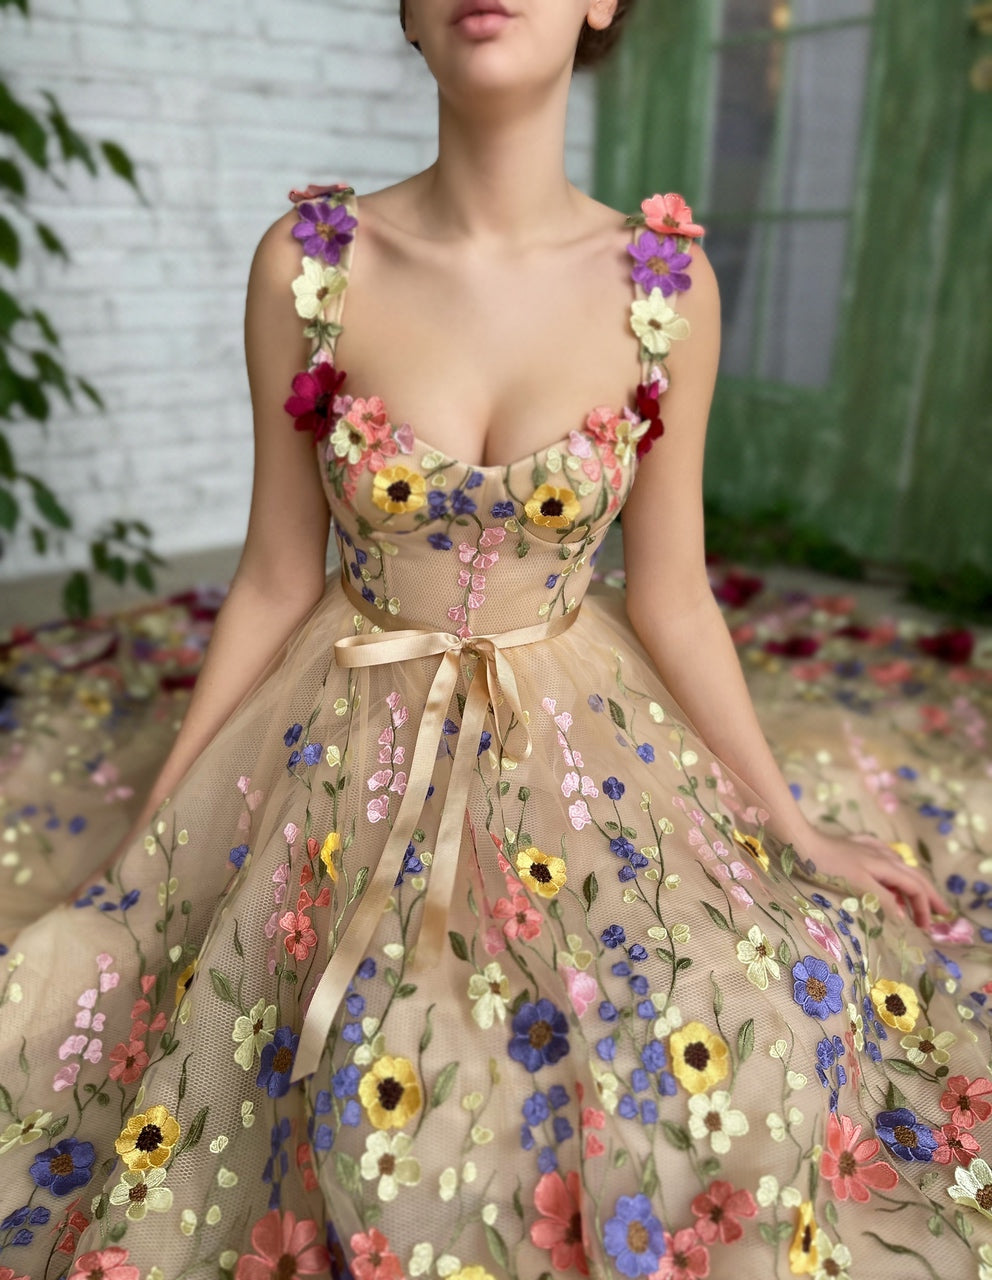 Beige A-Line dress with flowers, spaghetti straps and embroidery